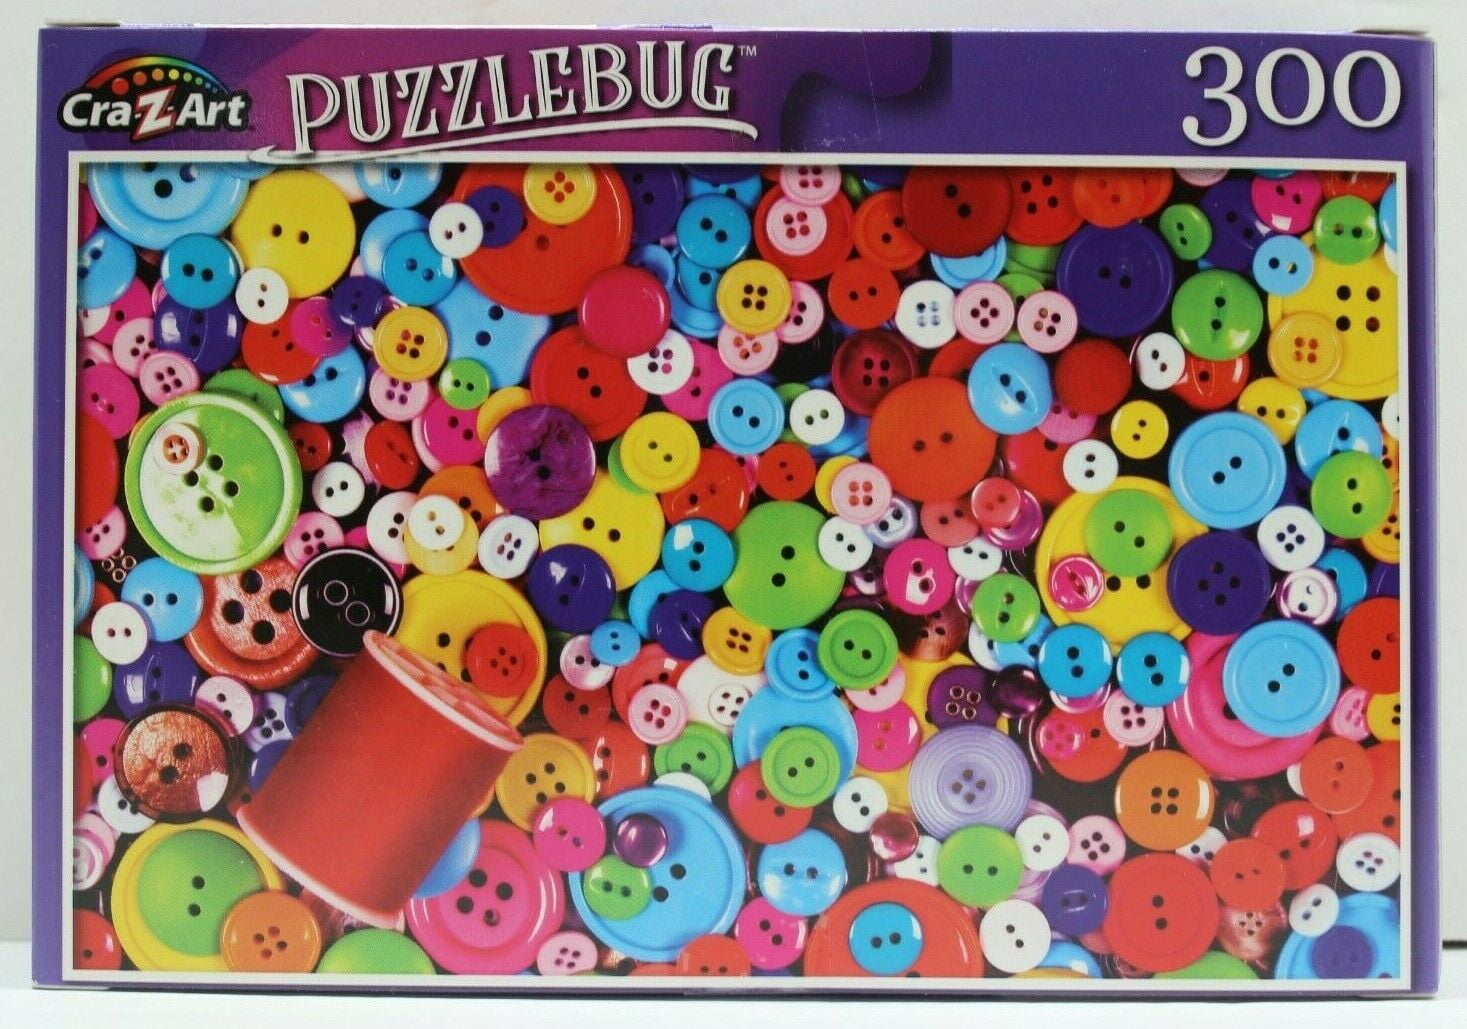 Candy on colorful plates 300pc Puzzlebug Jigsaw Puzzle 